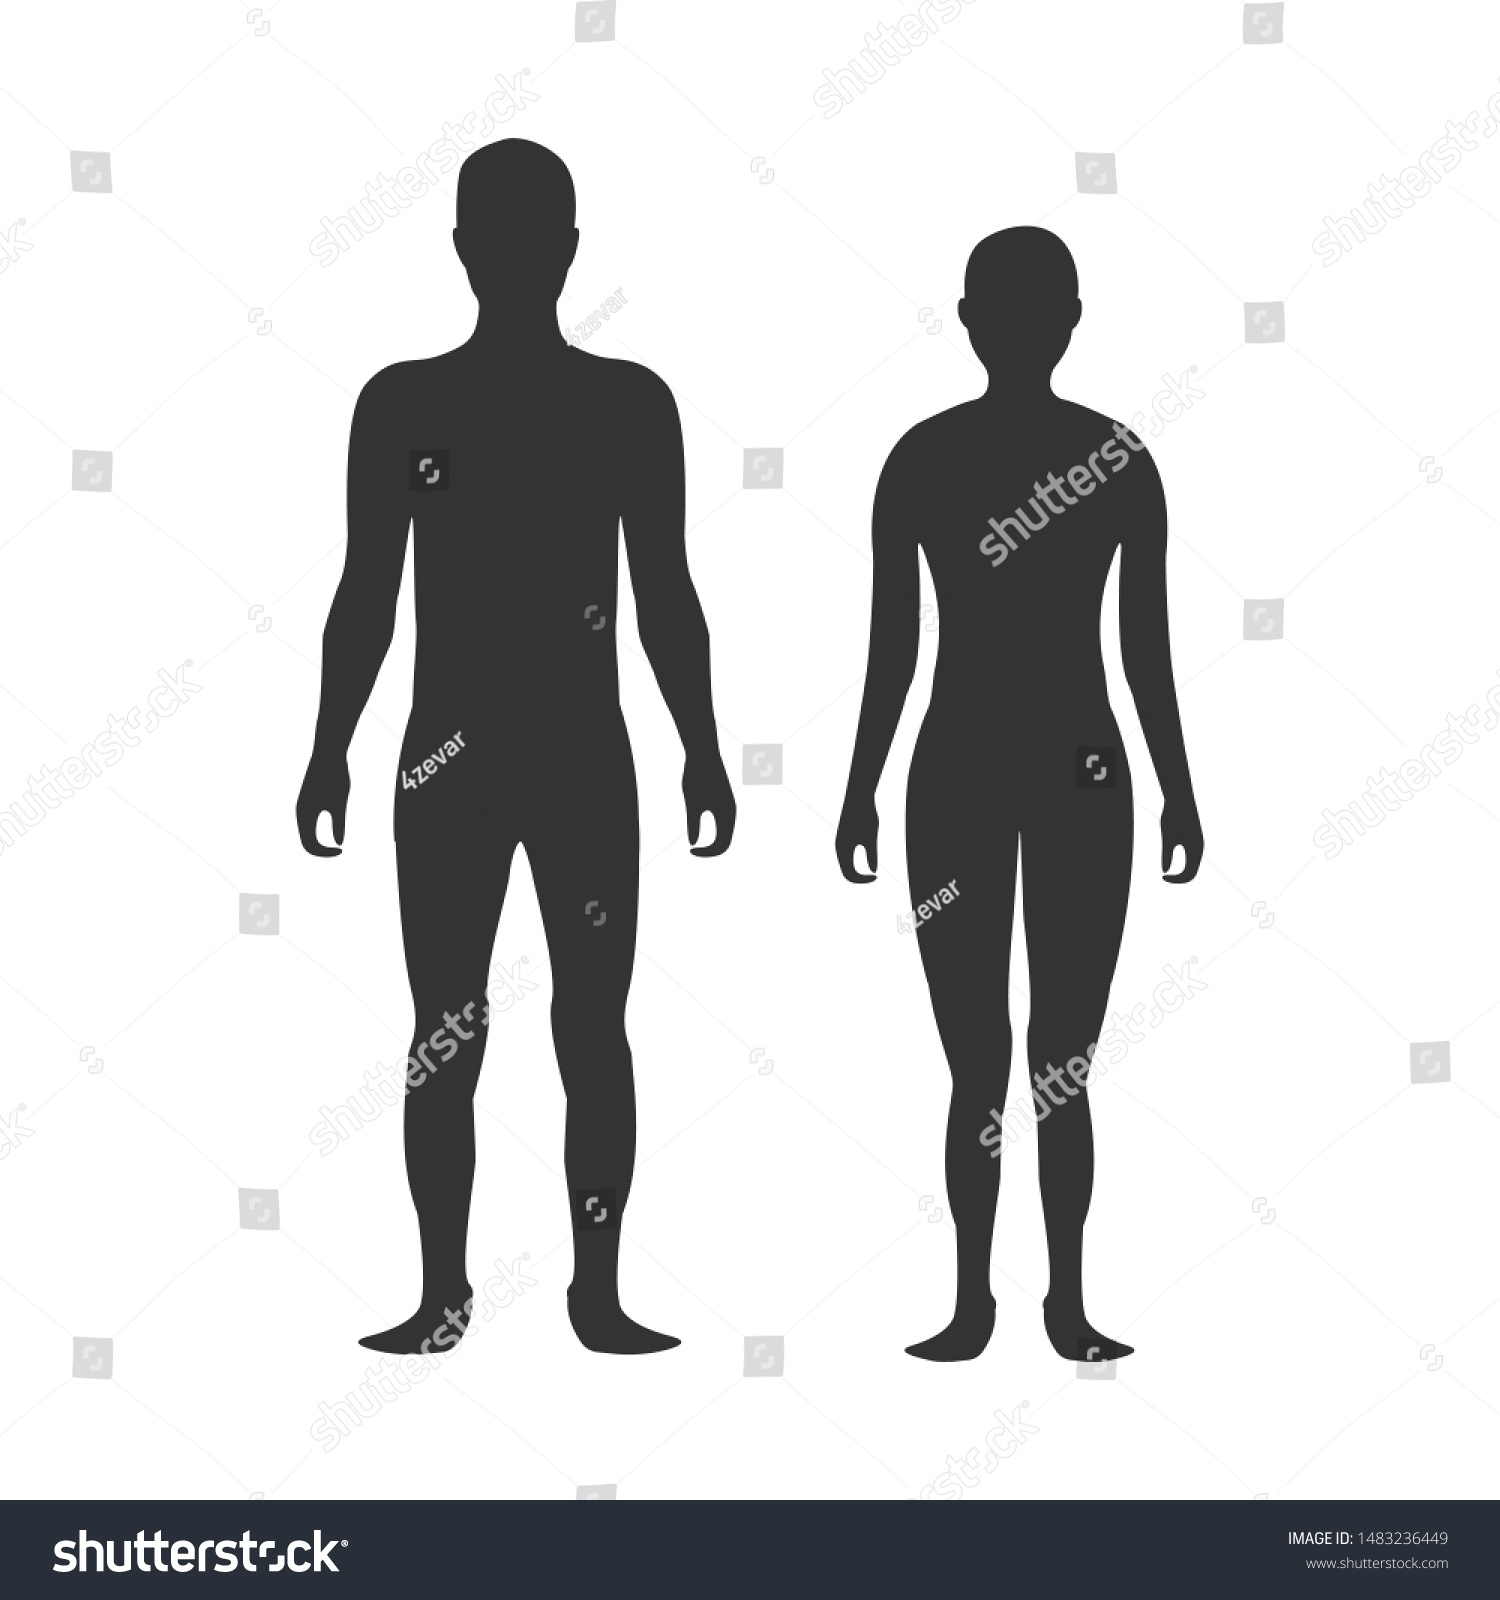 Male Female Body Silhouette Template Isolated Stock Vector Royalty Free 1483236449 Shutterstock 8447